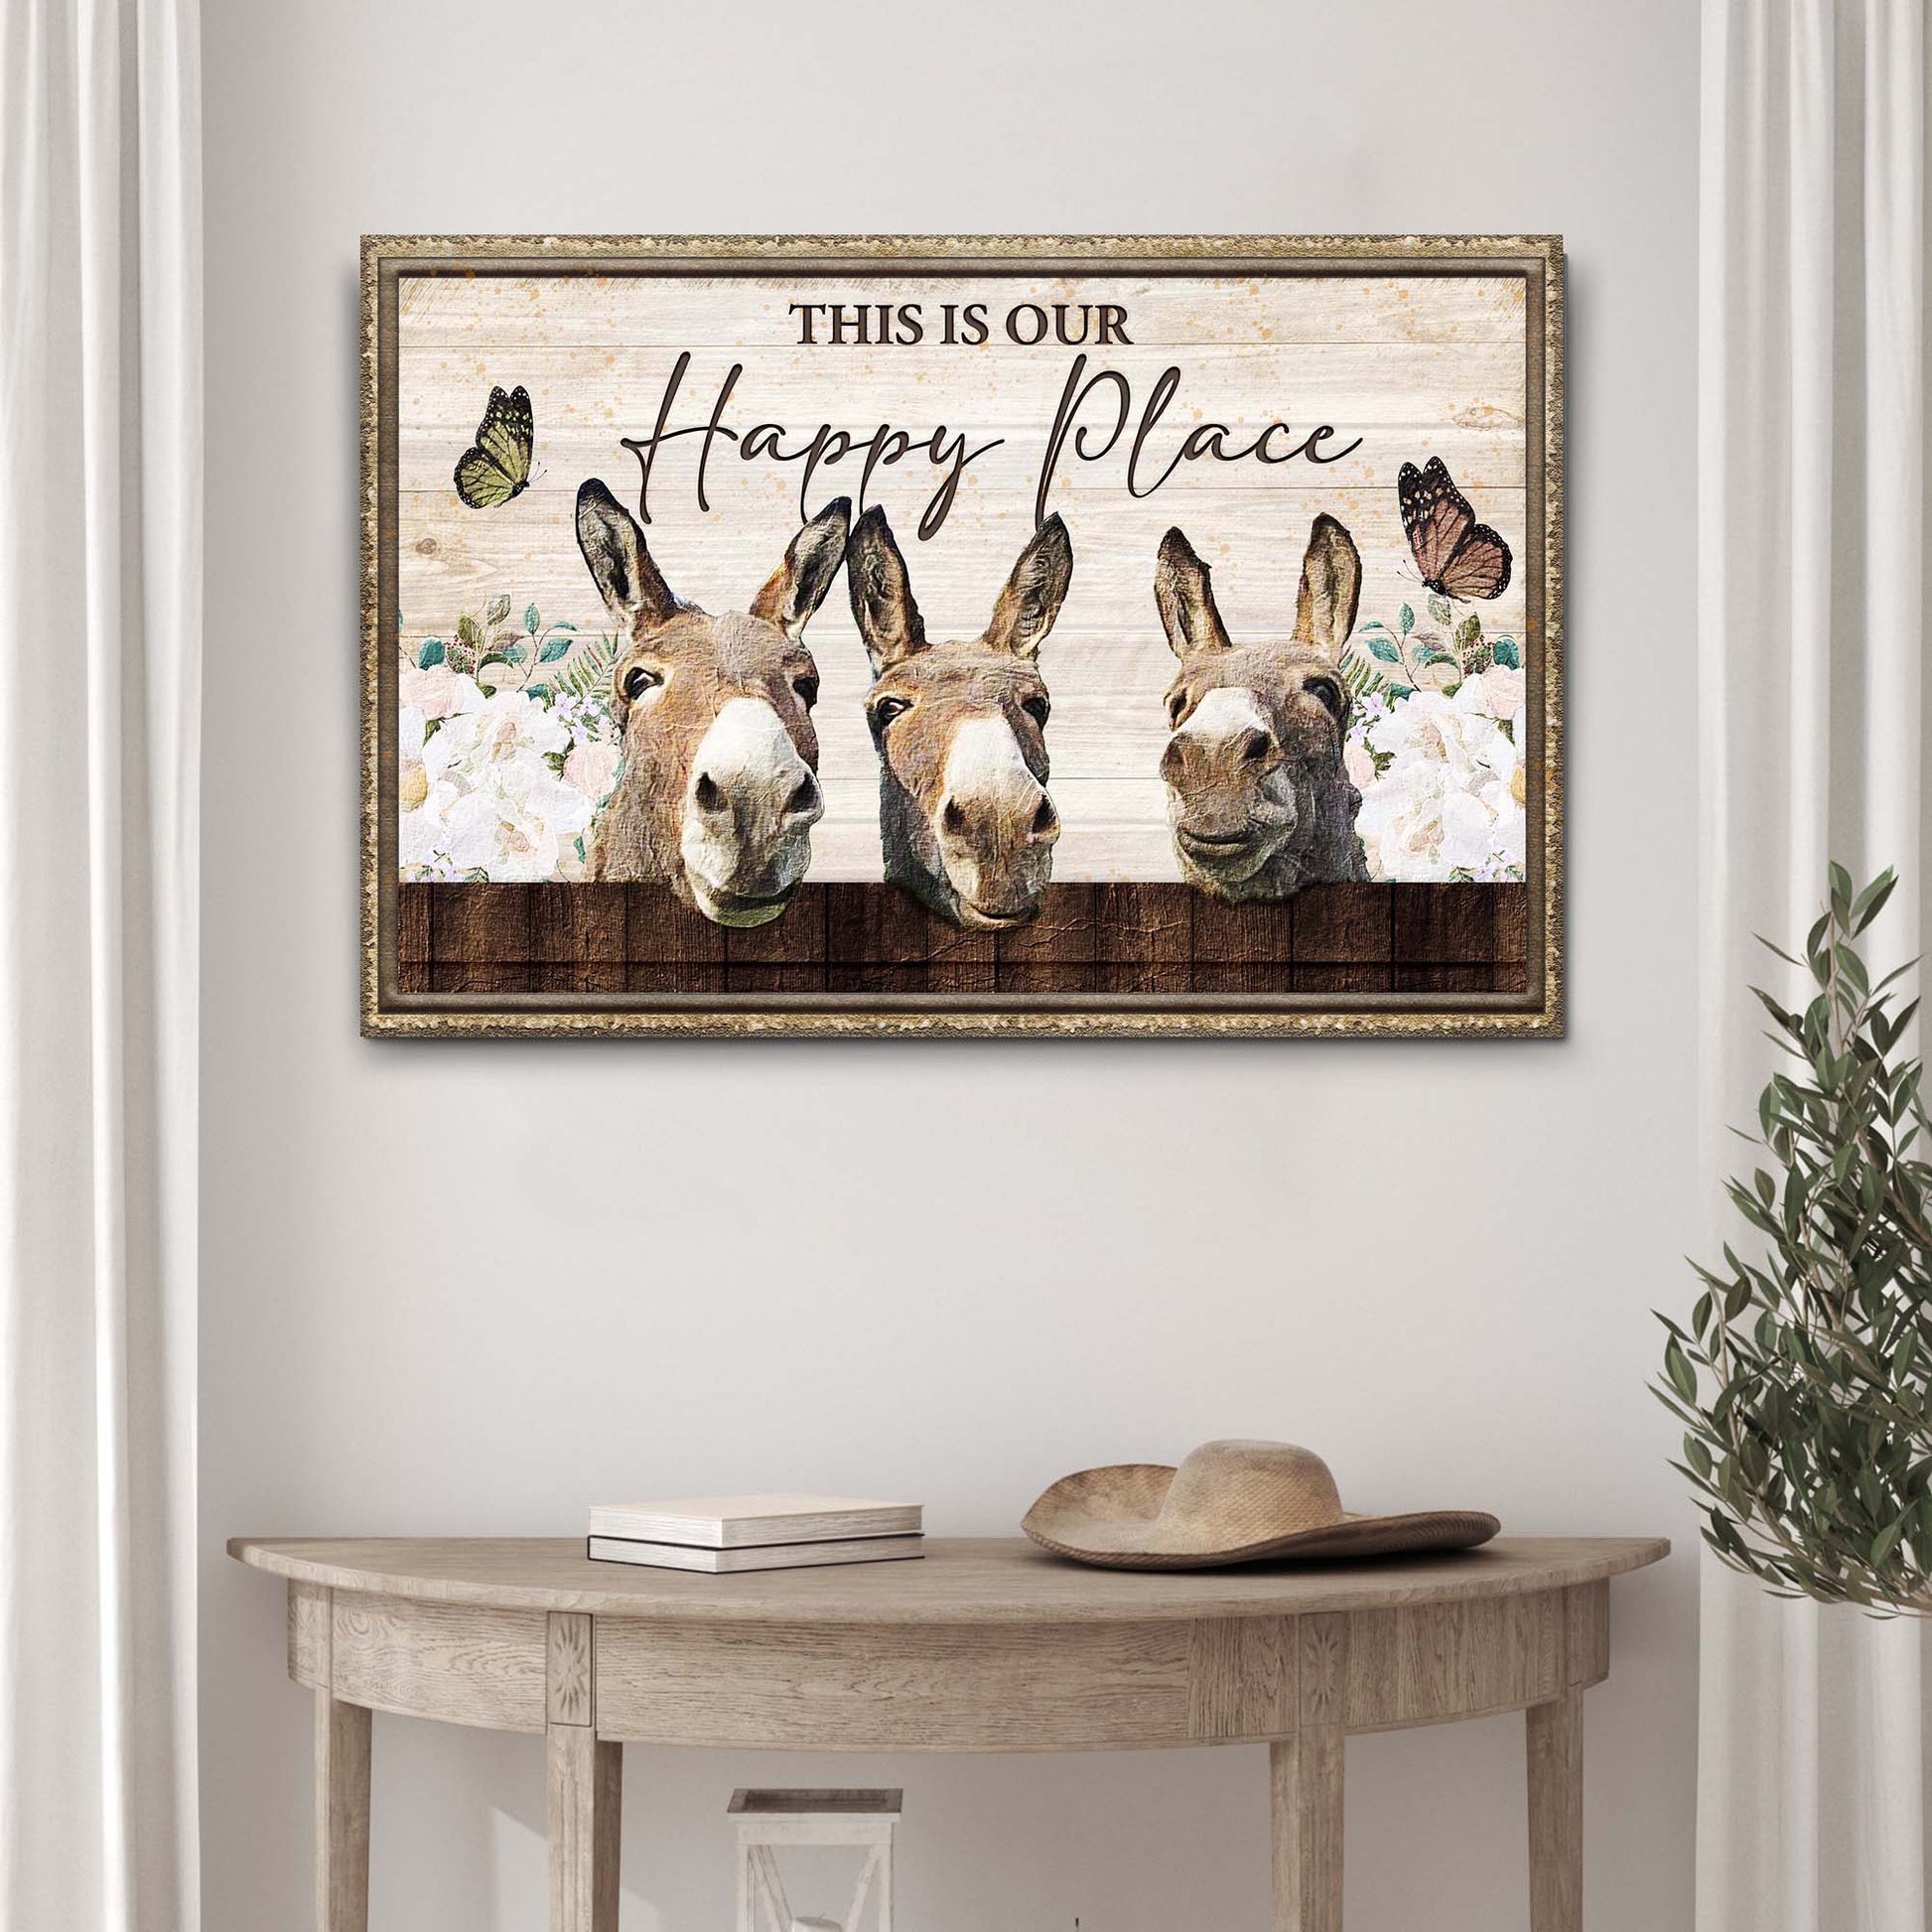 This Is Our Happy Place Donkey Sign - Image by Tailored Canvases